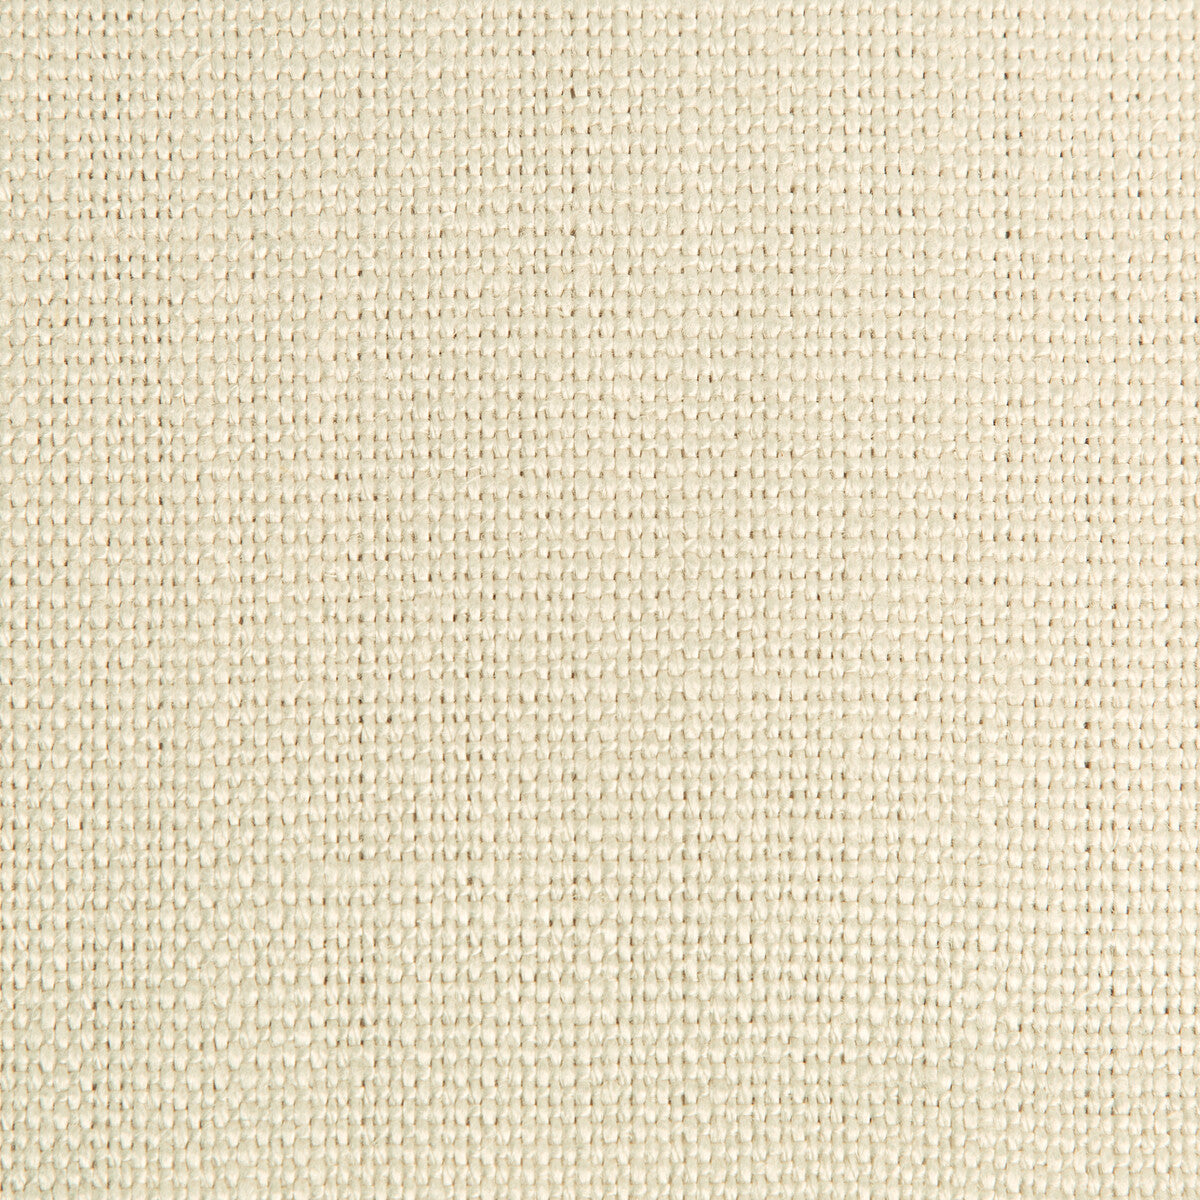 Stone Harbor fabric in flake color - pattern 27591.1011.0 - by Kravet Basics in the The Complete Linen IV collection